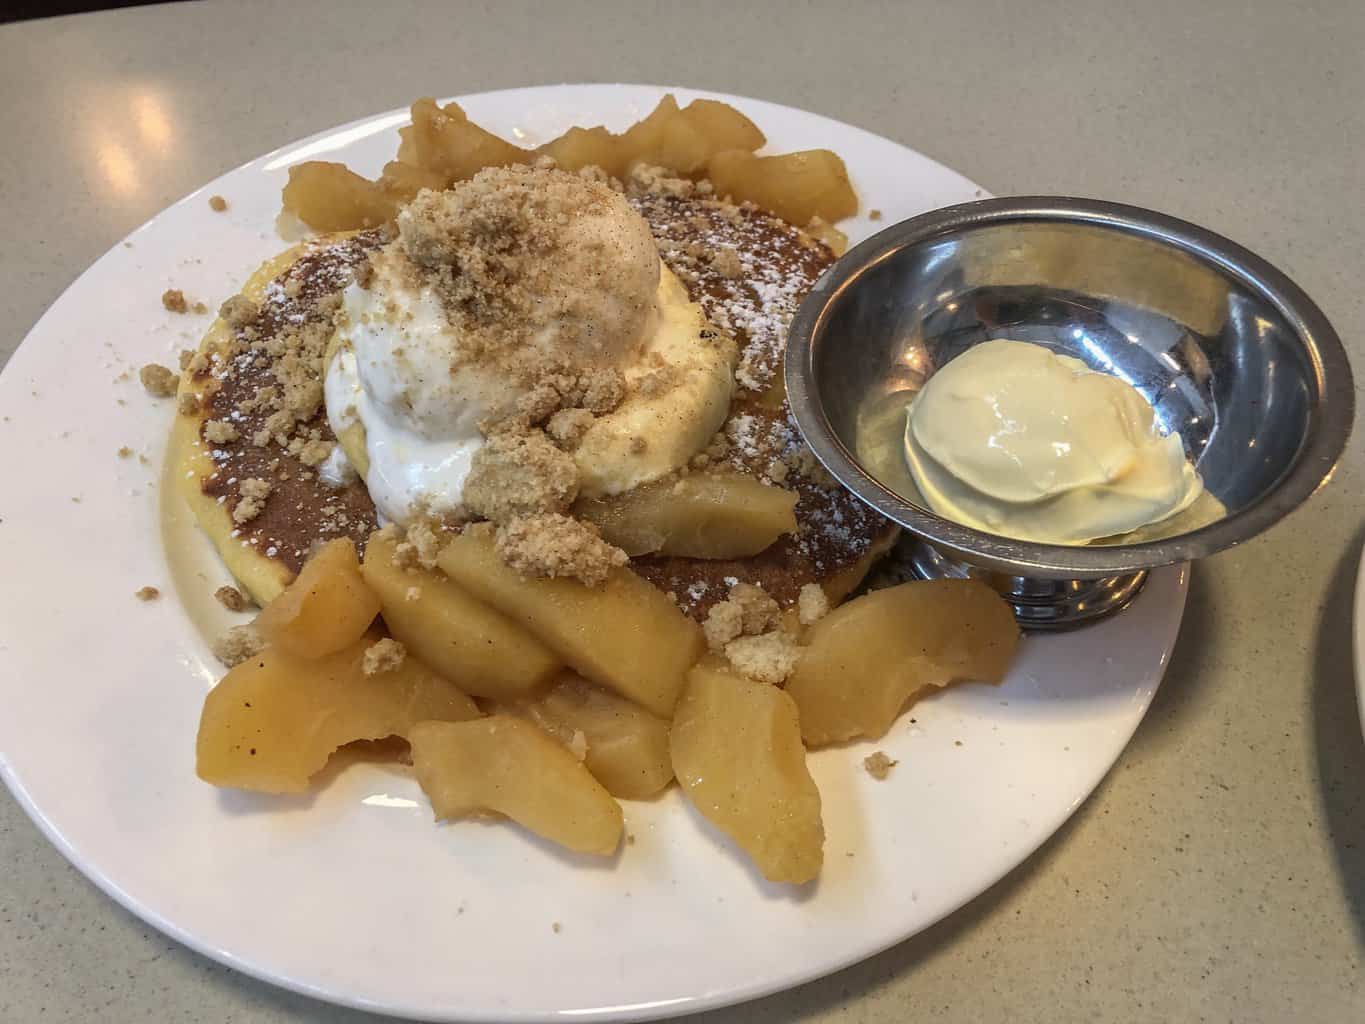 Apple Crumble Pancakes at the Pancakes on the Rocks